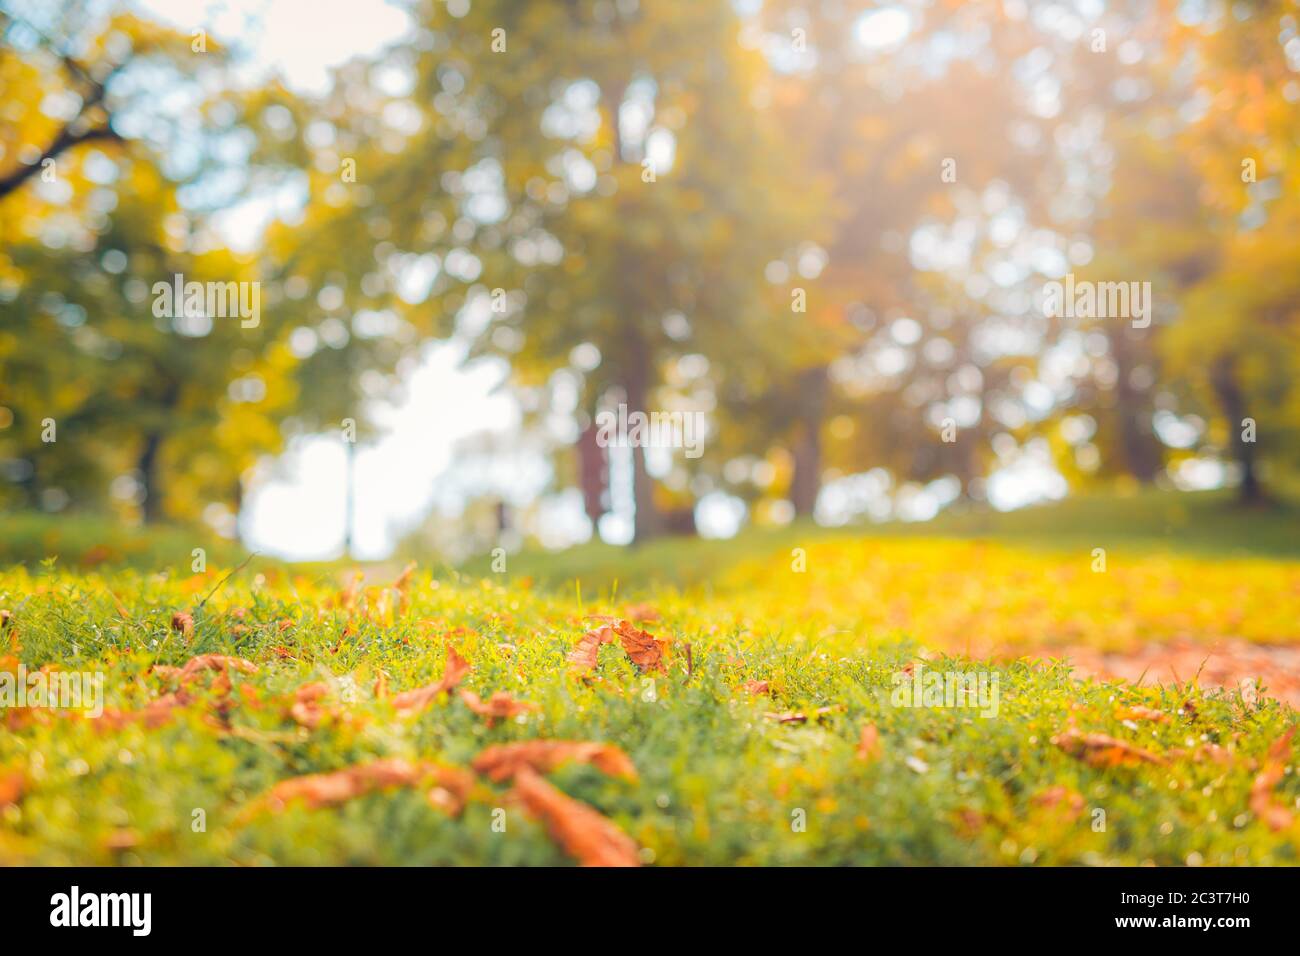 Closeup of spring grass field with dandelions and sunlight. Autumn spring background with blurred meadow trees Stock Photo